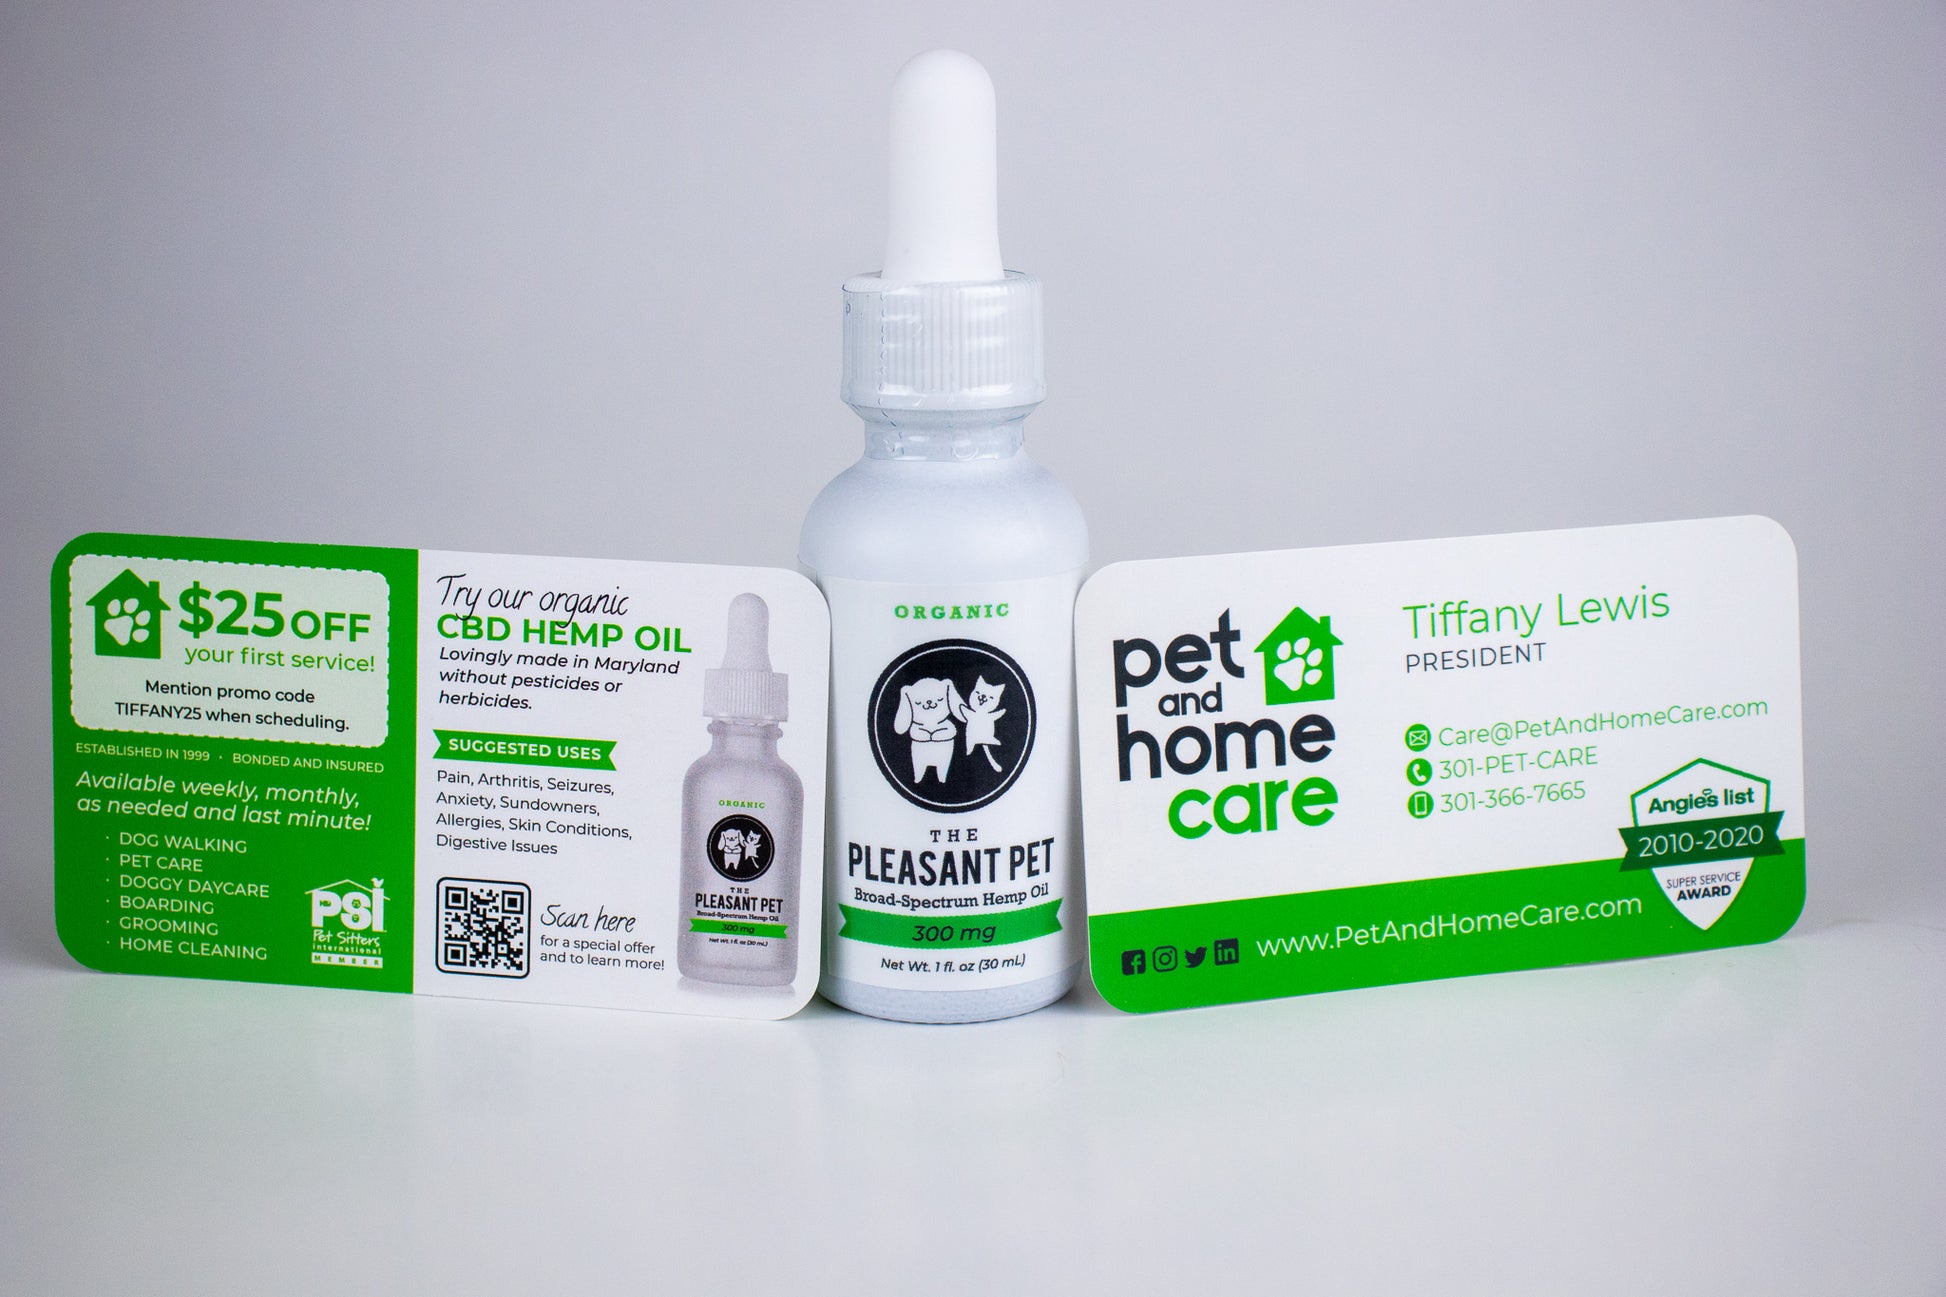 a bottle of pet cbd oil and pet and home care business cards